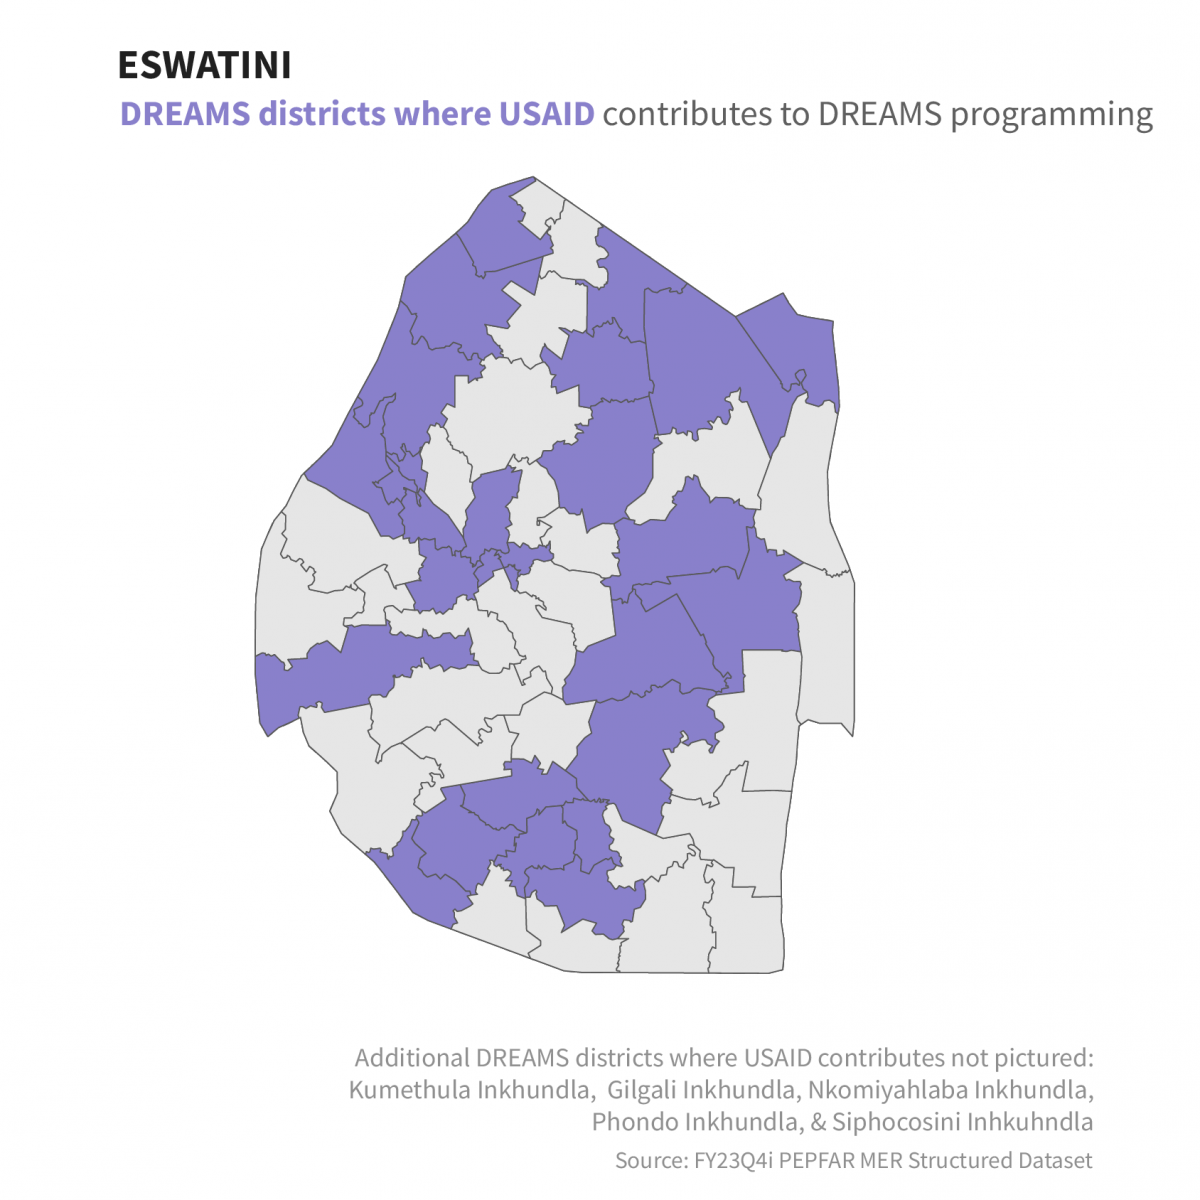 Eswatini: DREAMS districts where USAID contributes to DREAMS programming